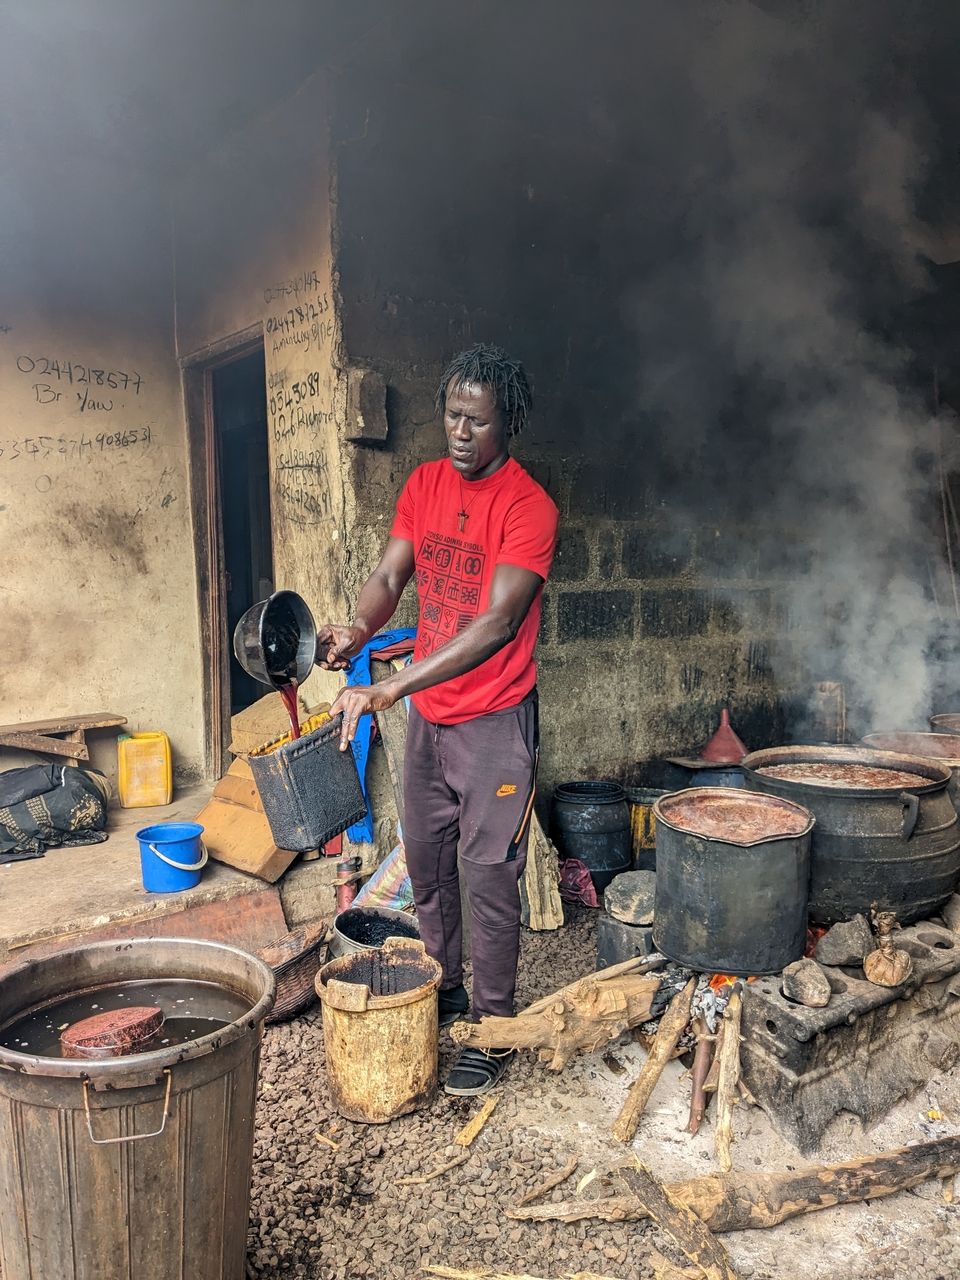 Kojo Adom, a native of the Ntonso Adinkra village pours dye that has been generated from boiling tree bark into a container. When the dye is boiled again, it turns darker.